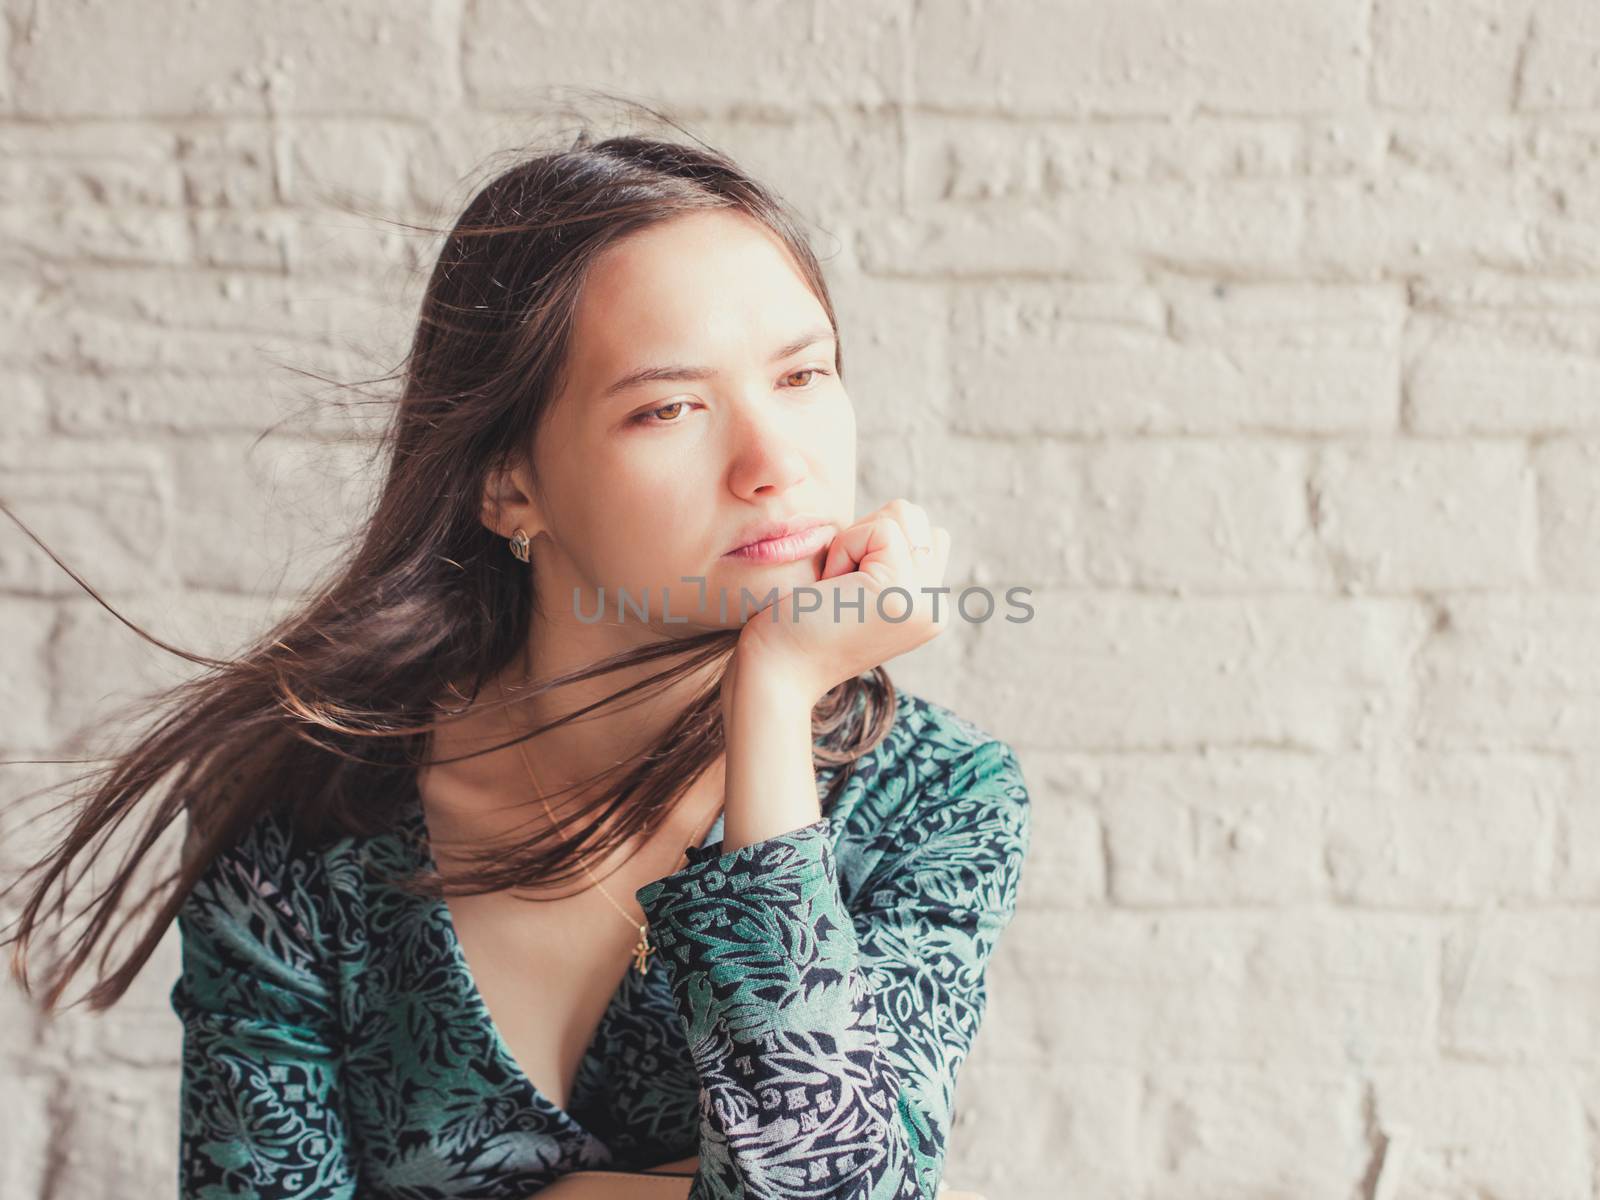 Stern and serious looking away young brunette beauty. Closeup portrait of serious young woman with sensual look away. Girl rests her chin on hand and serious looking away. Copy space